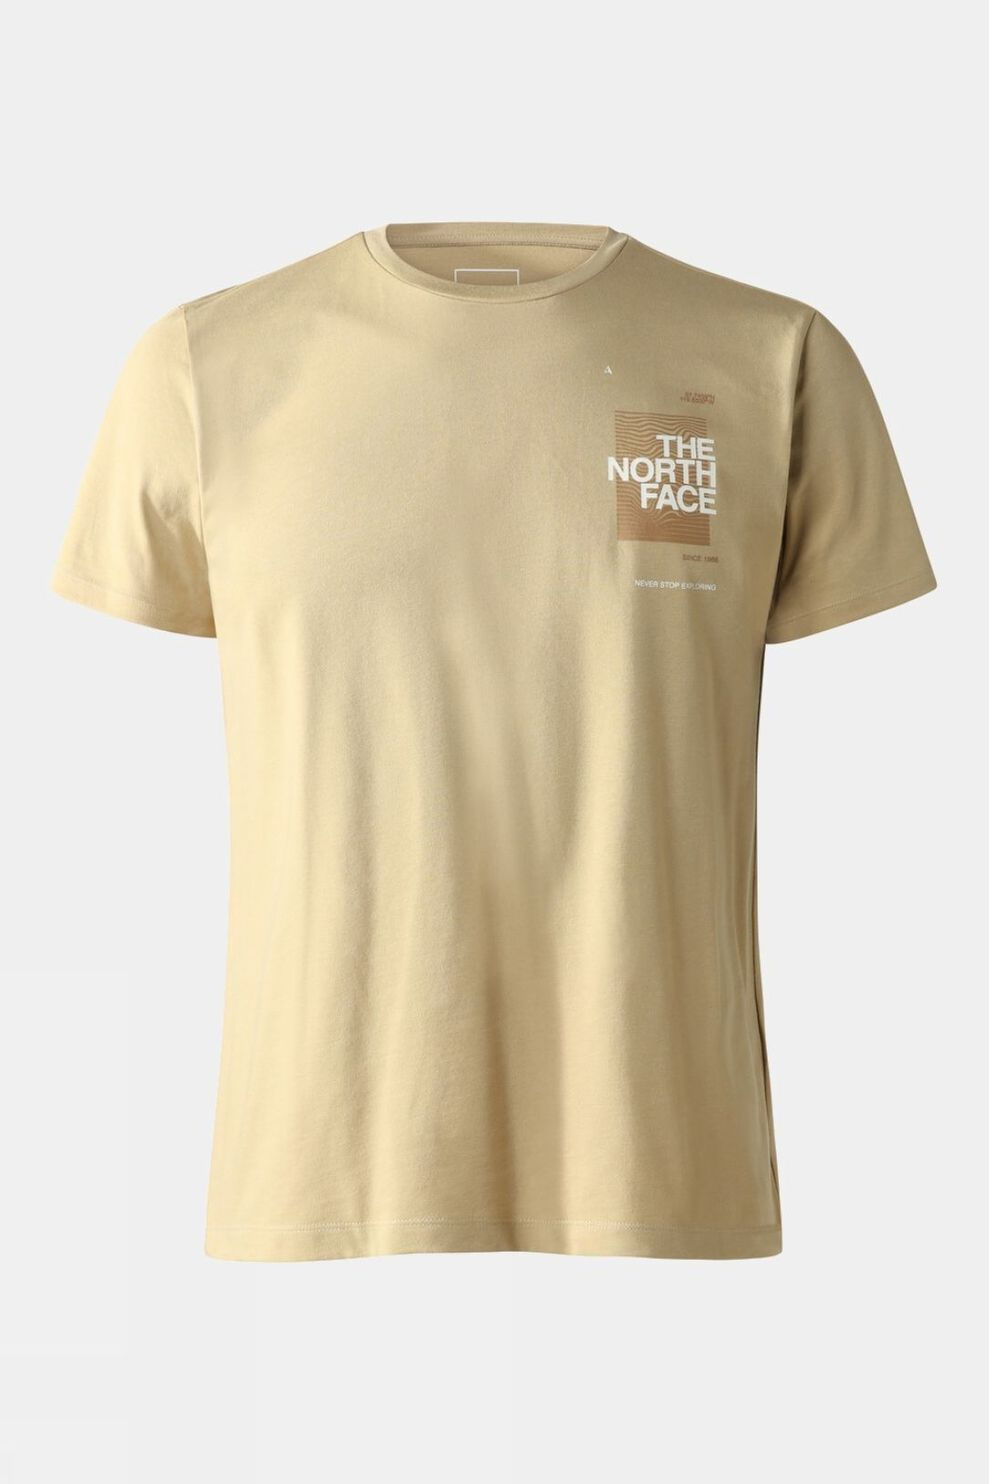 The North Face Mens Foundation Graphic T-Shirt